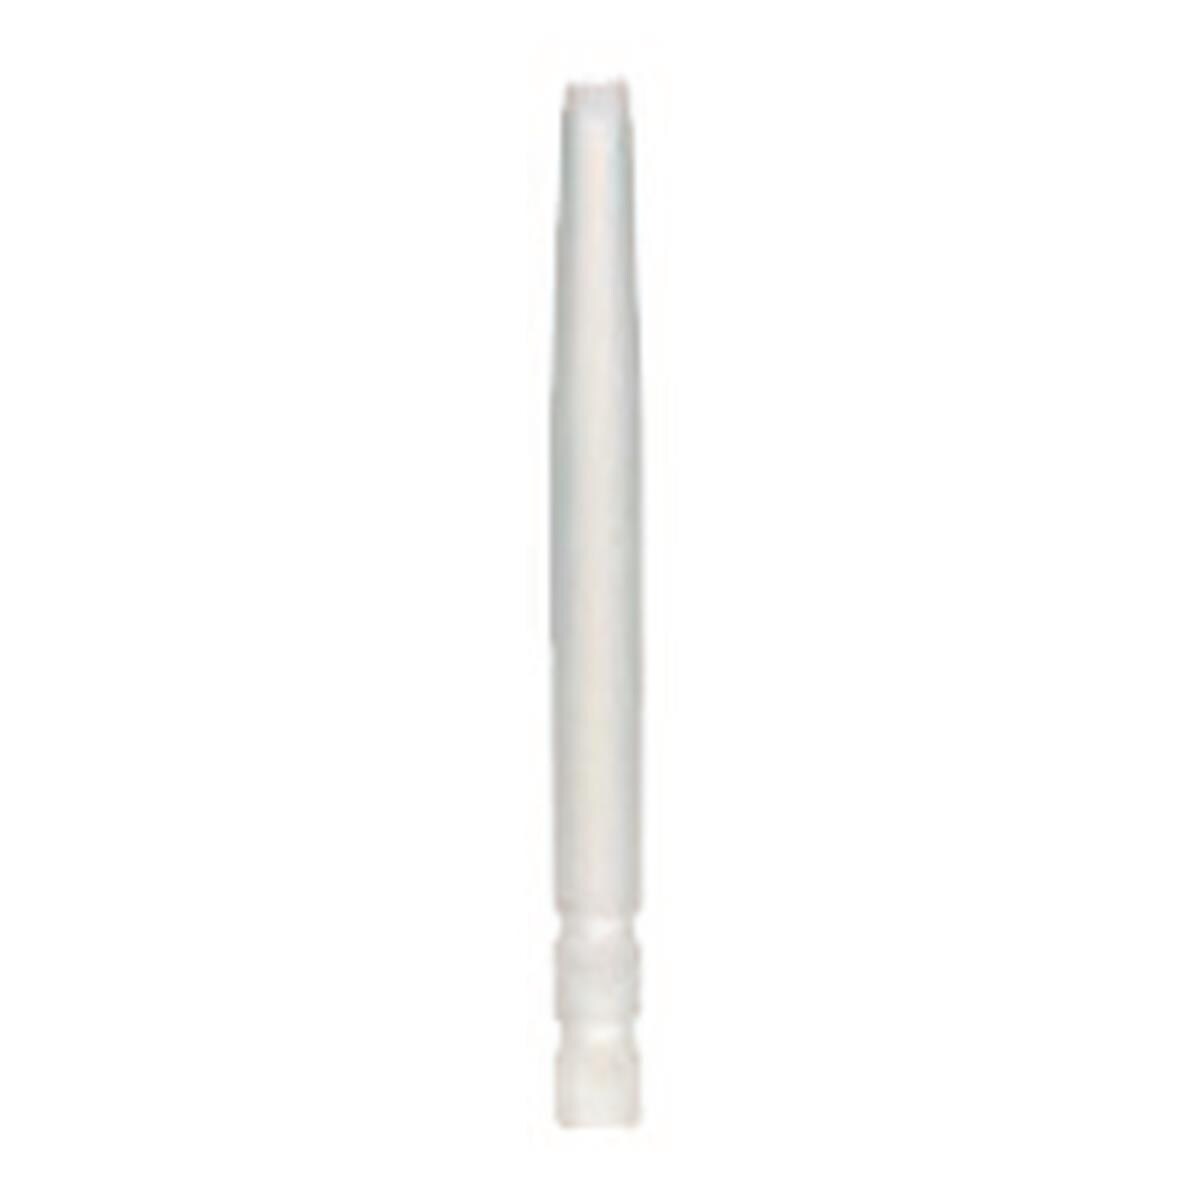 Tenons Cylindro-Coniques Calcinable L 11.4mm Blanc - Bote de 40 - CONNECT'IC